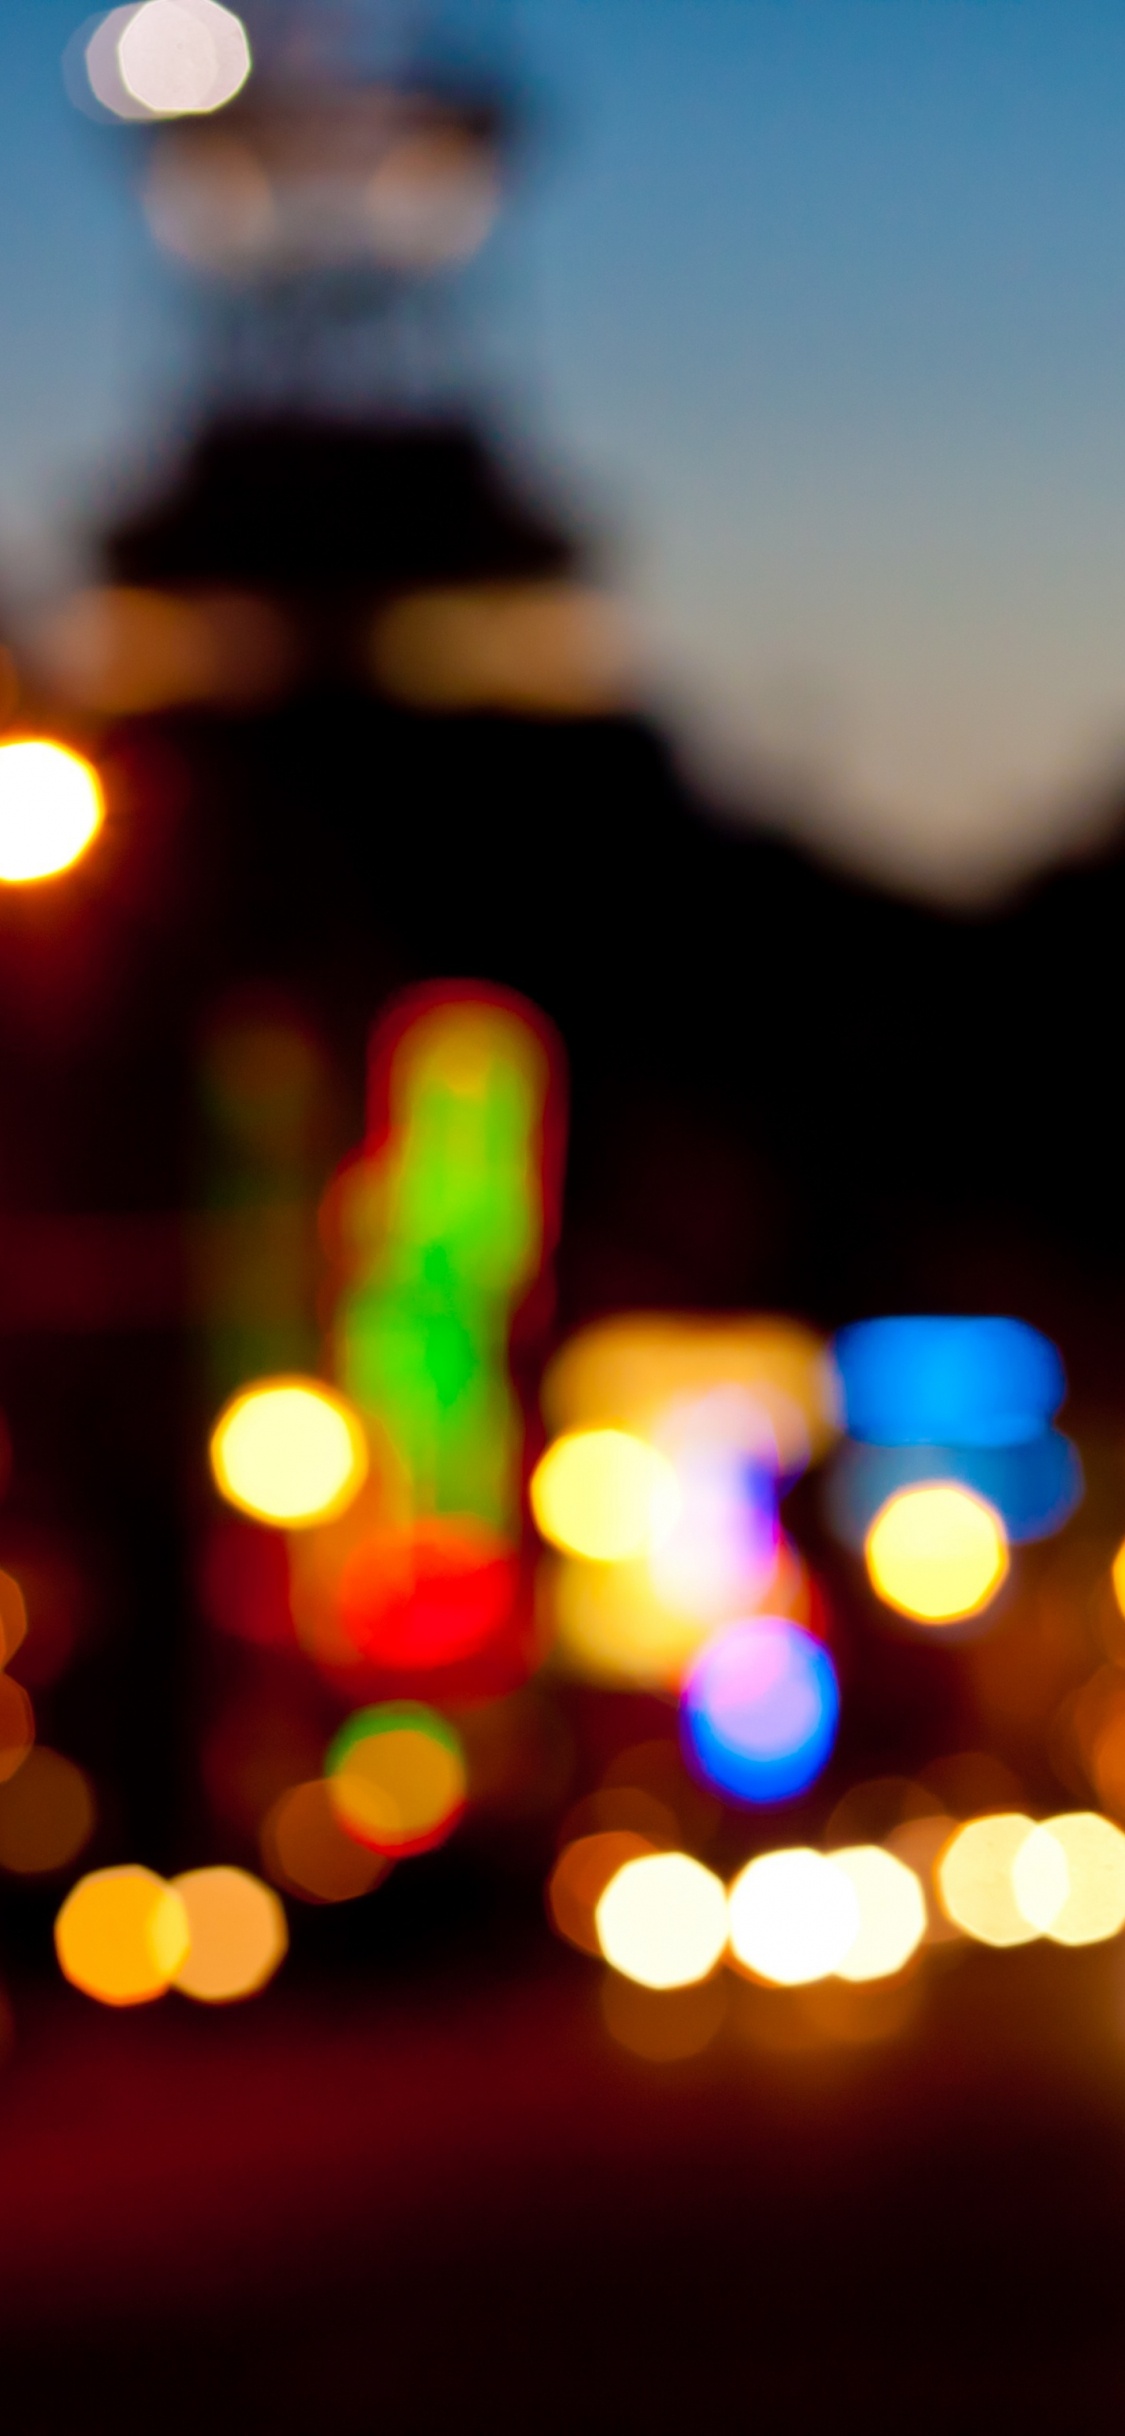 Bokeh Photography of City Lights During Night Time. Wallpaper in 1125x2436 Resolution